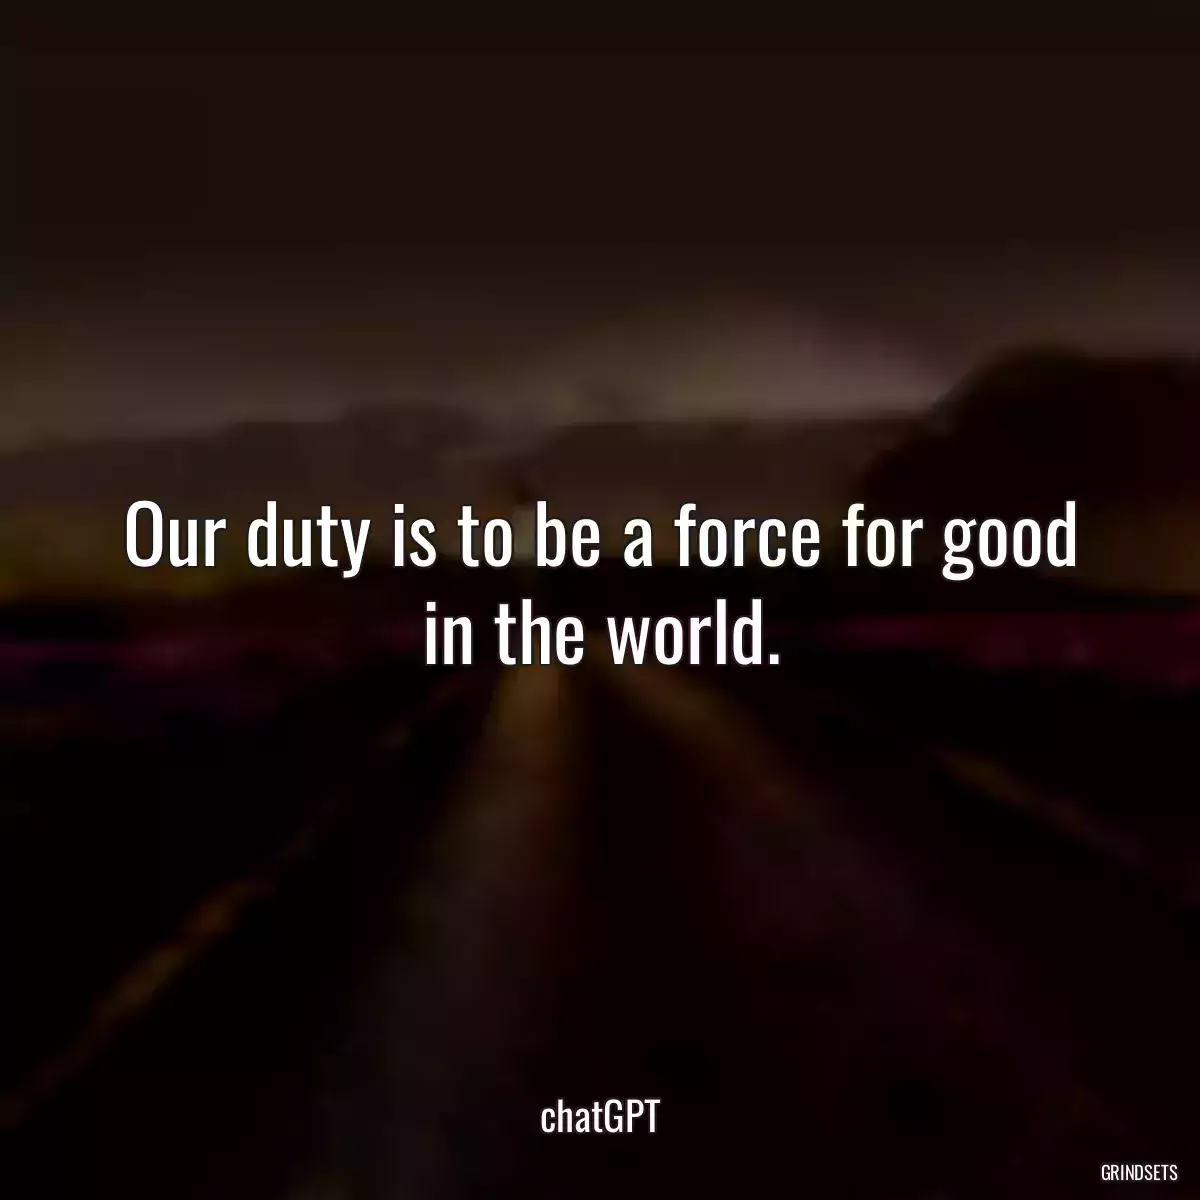 Our duty is to be a force for good in the world.